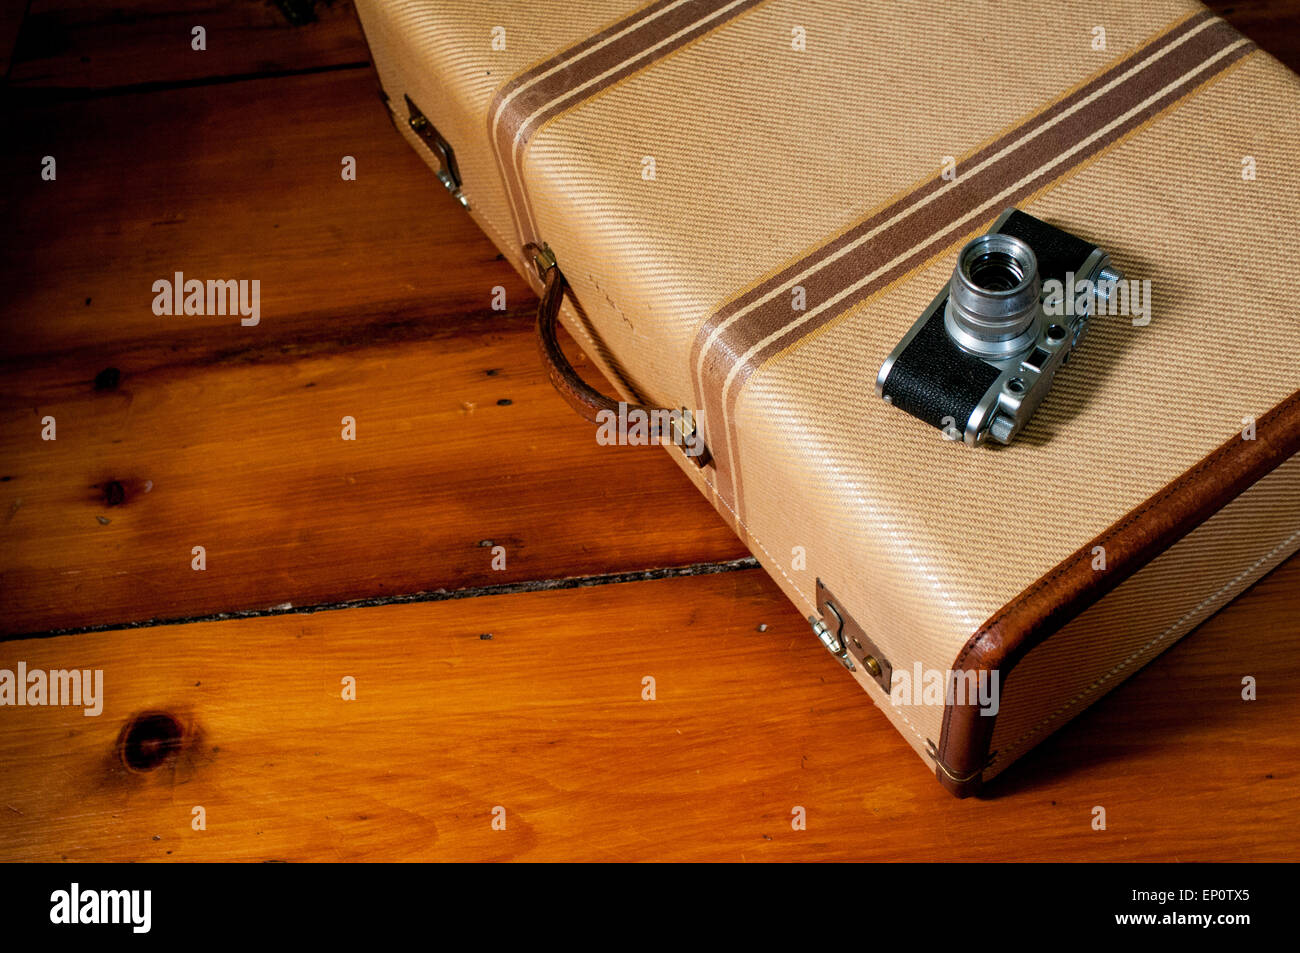 A vintage suitcase and camera sit on a wood floor. Stock Photo